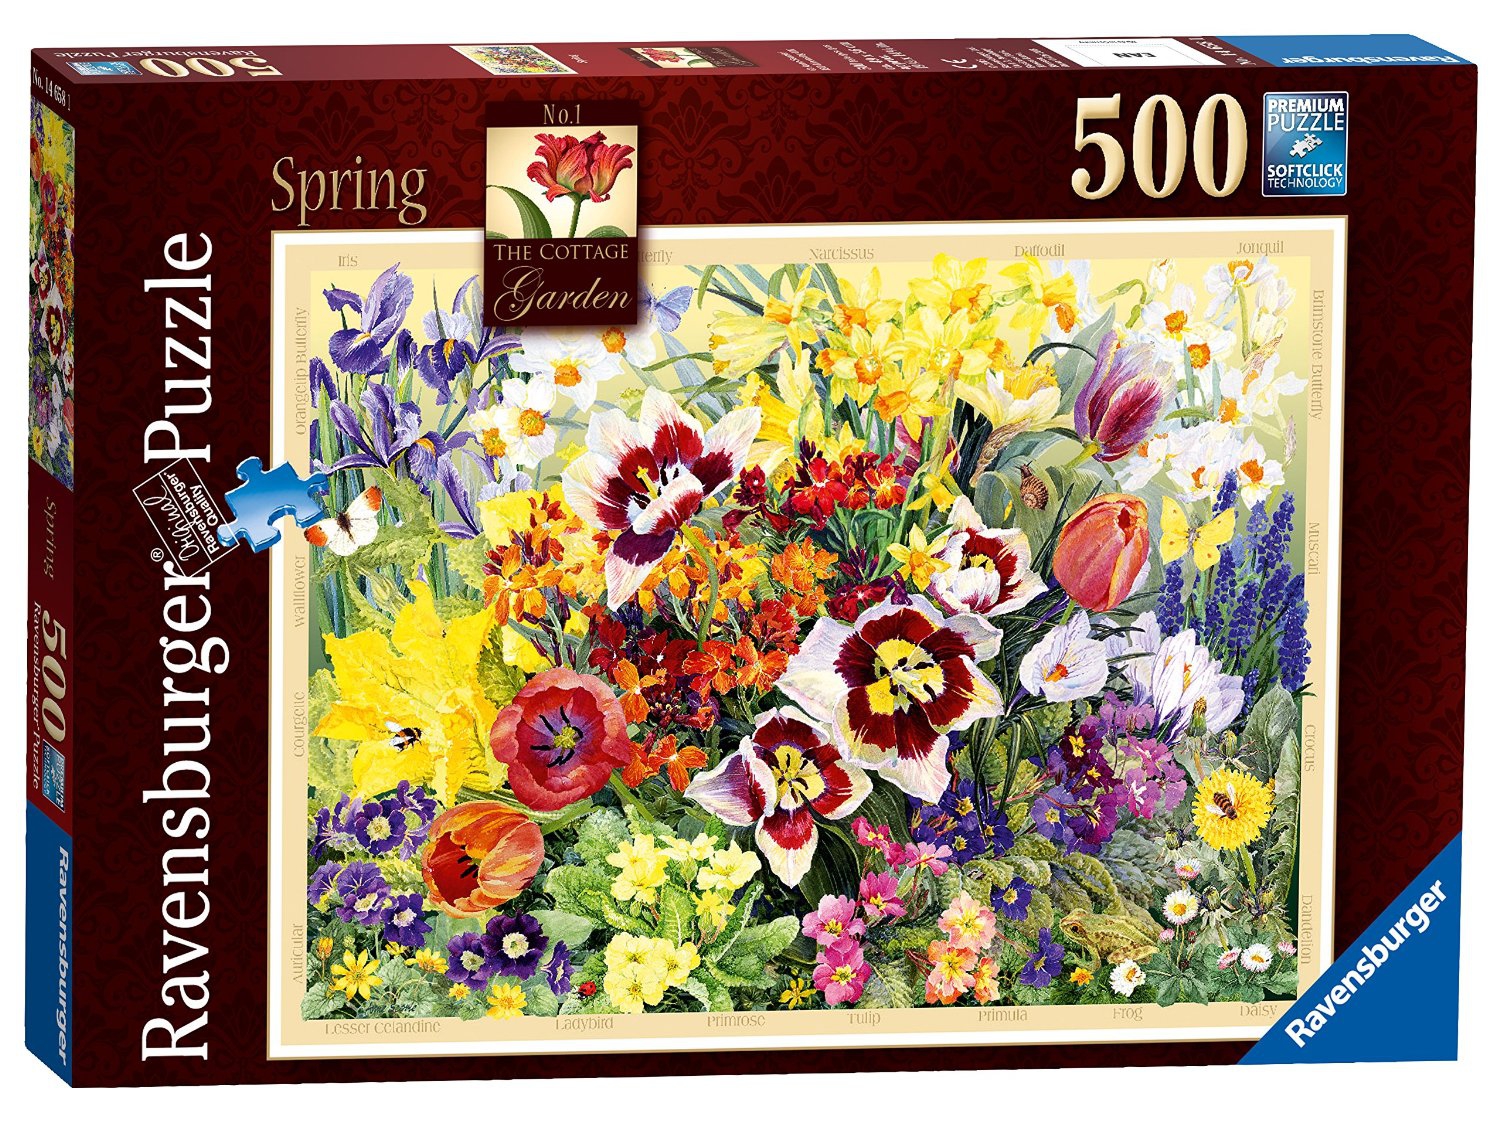 Ravensburger 'The Cottage Garden Spring' 500 Piece Jigsaw Puzzle Game